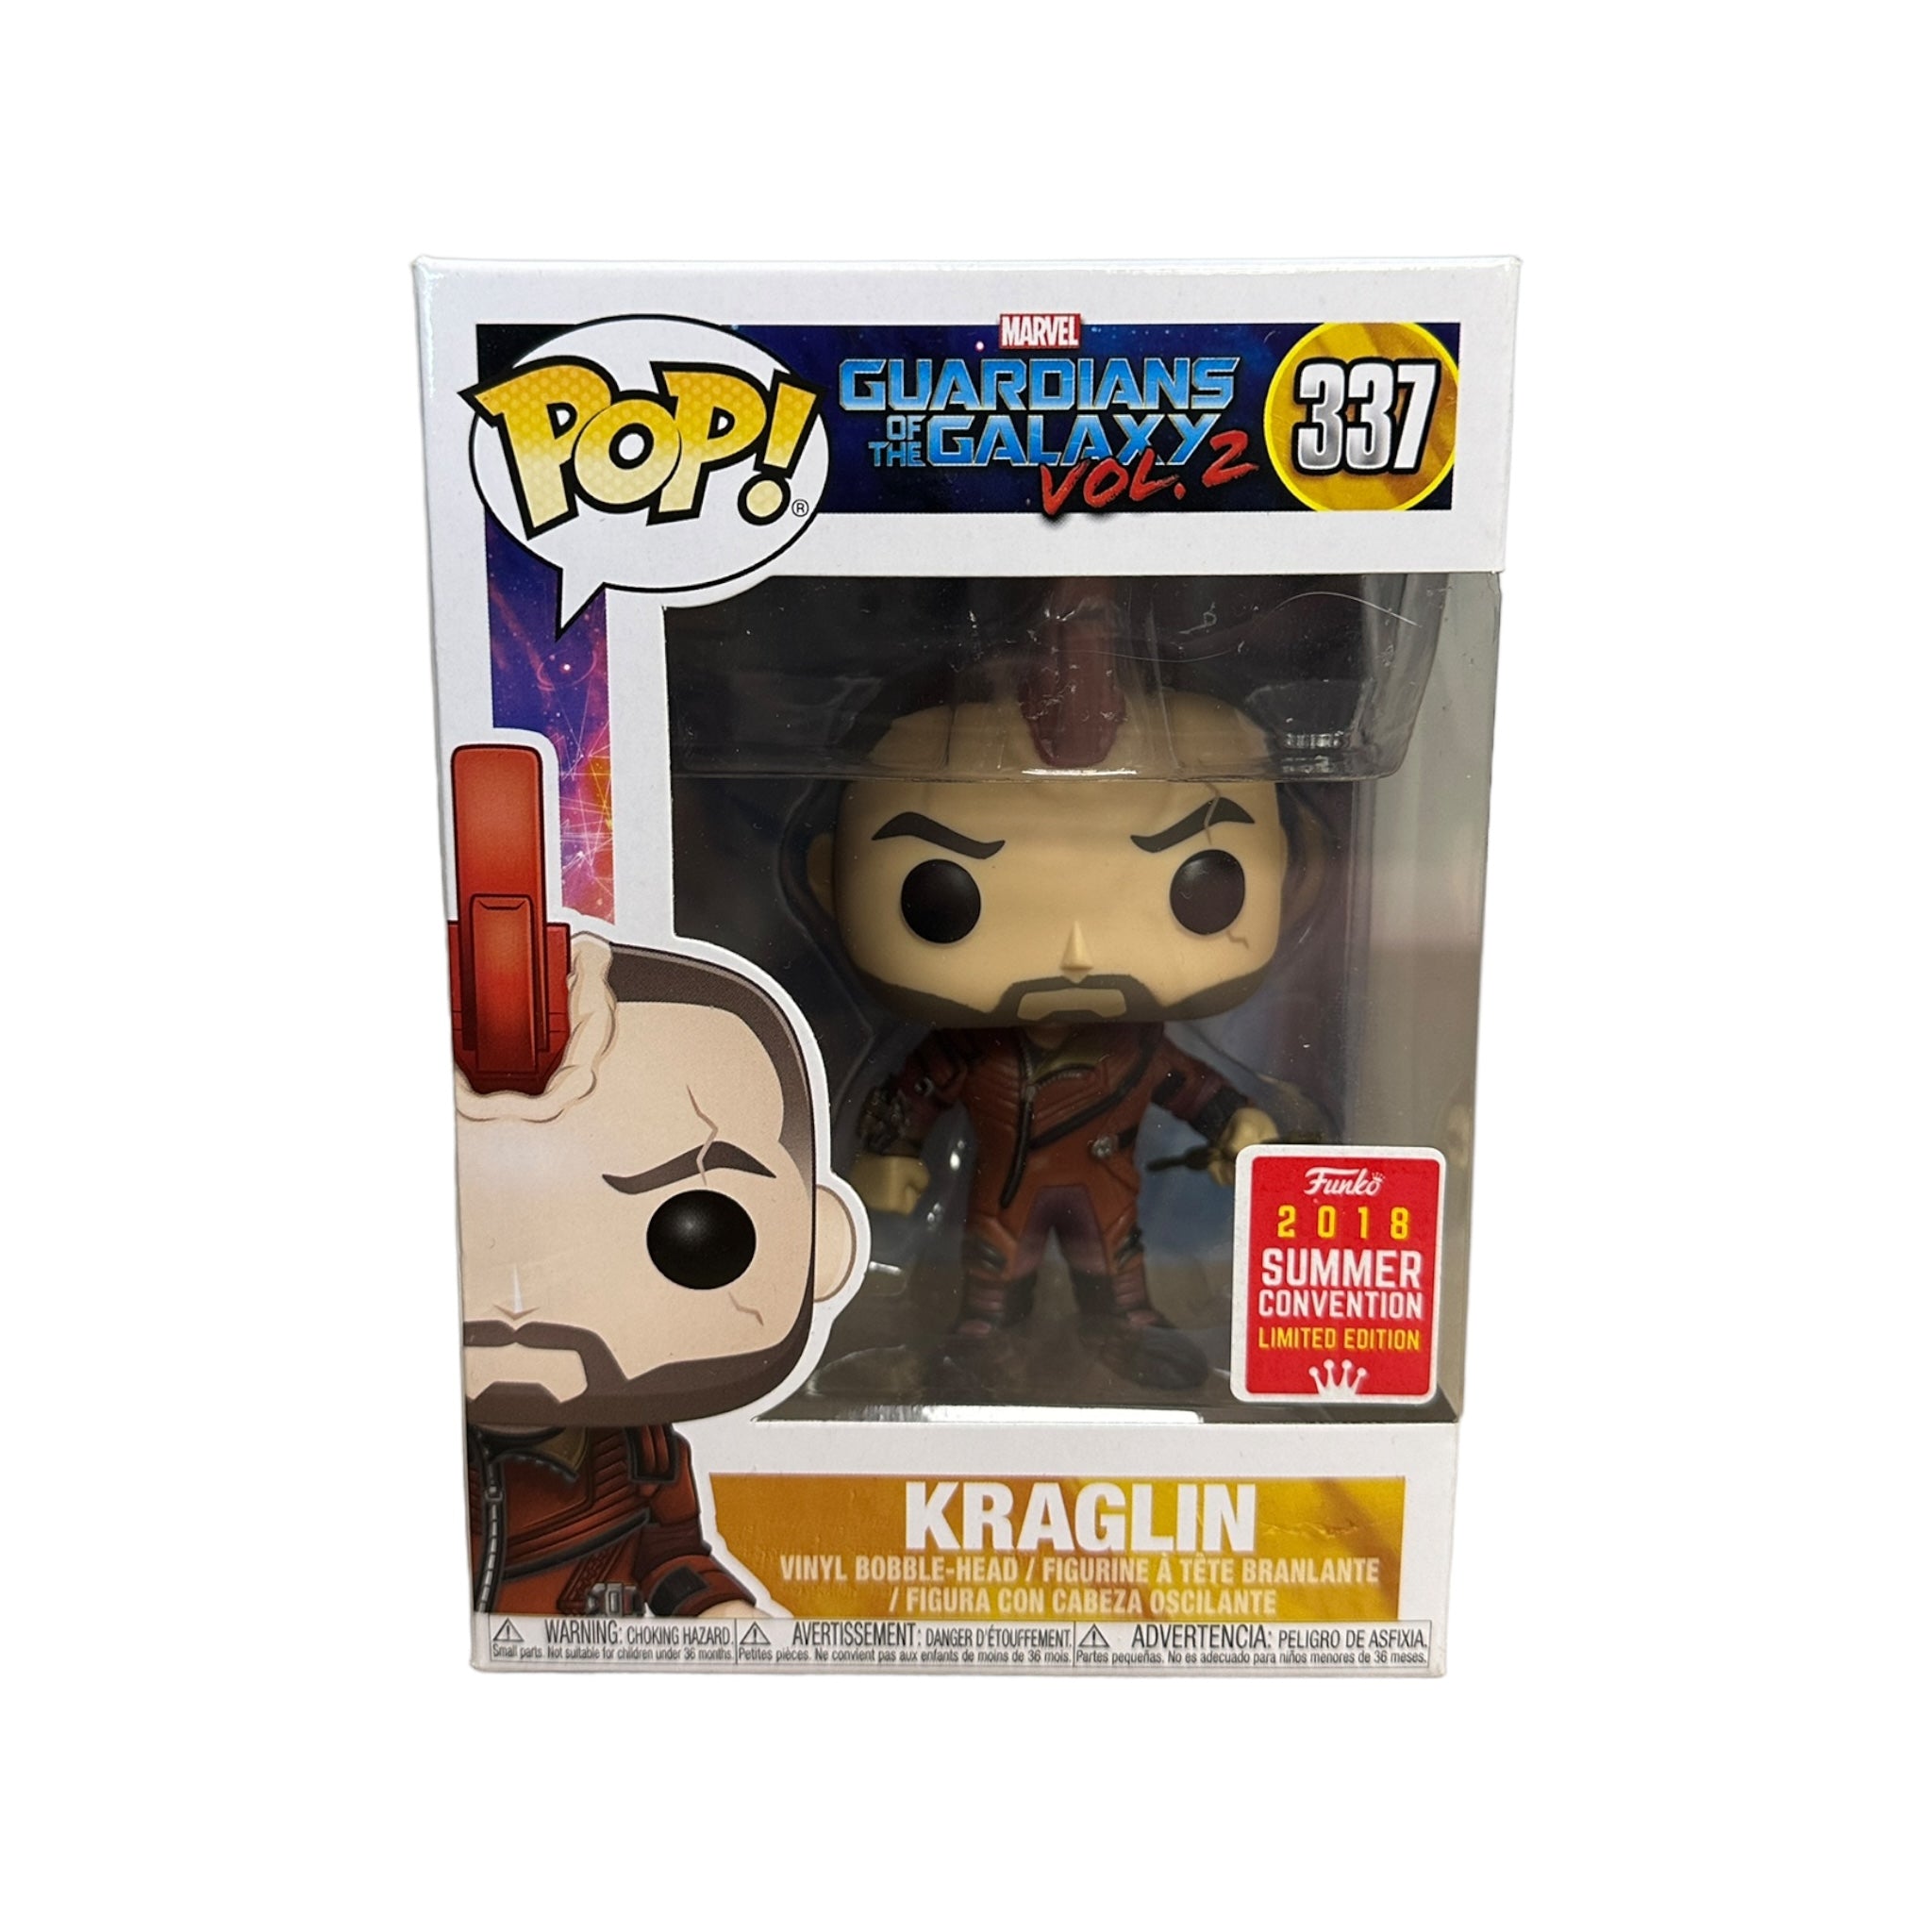 Kraglin #337 Funko Pop! - Guardians of The Galaxy Vol. 2 - SDCC 2018 Shared Exclusive - Condition 8/10